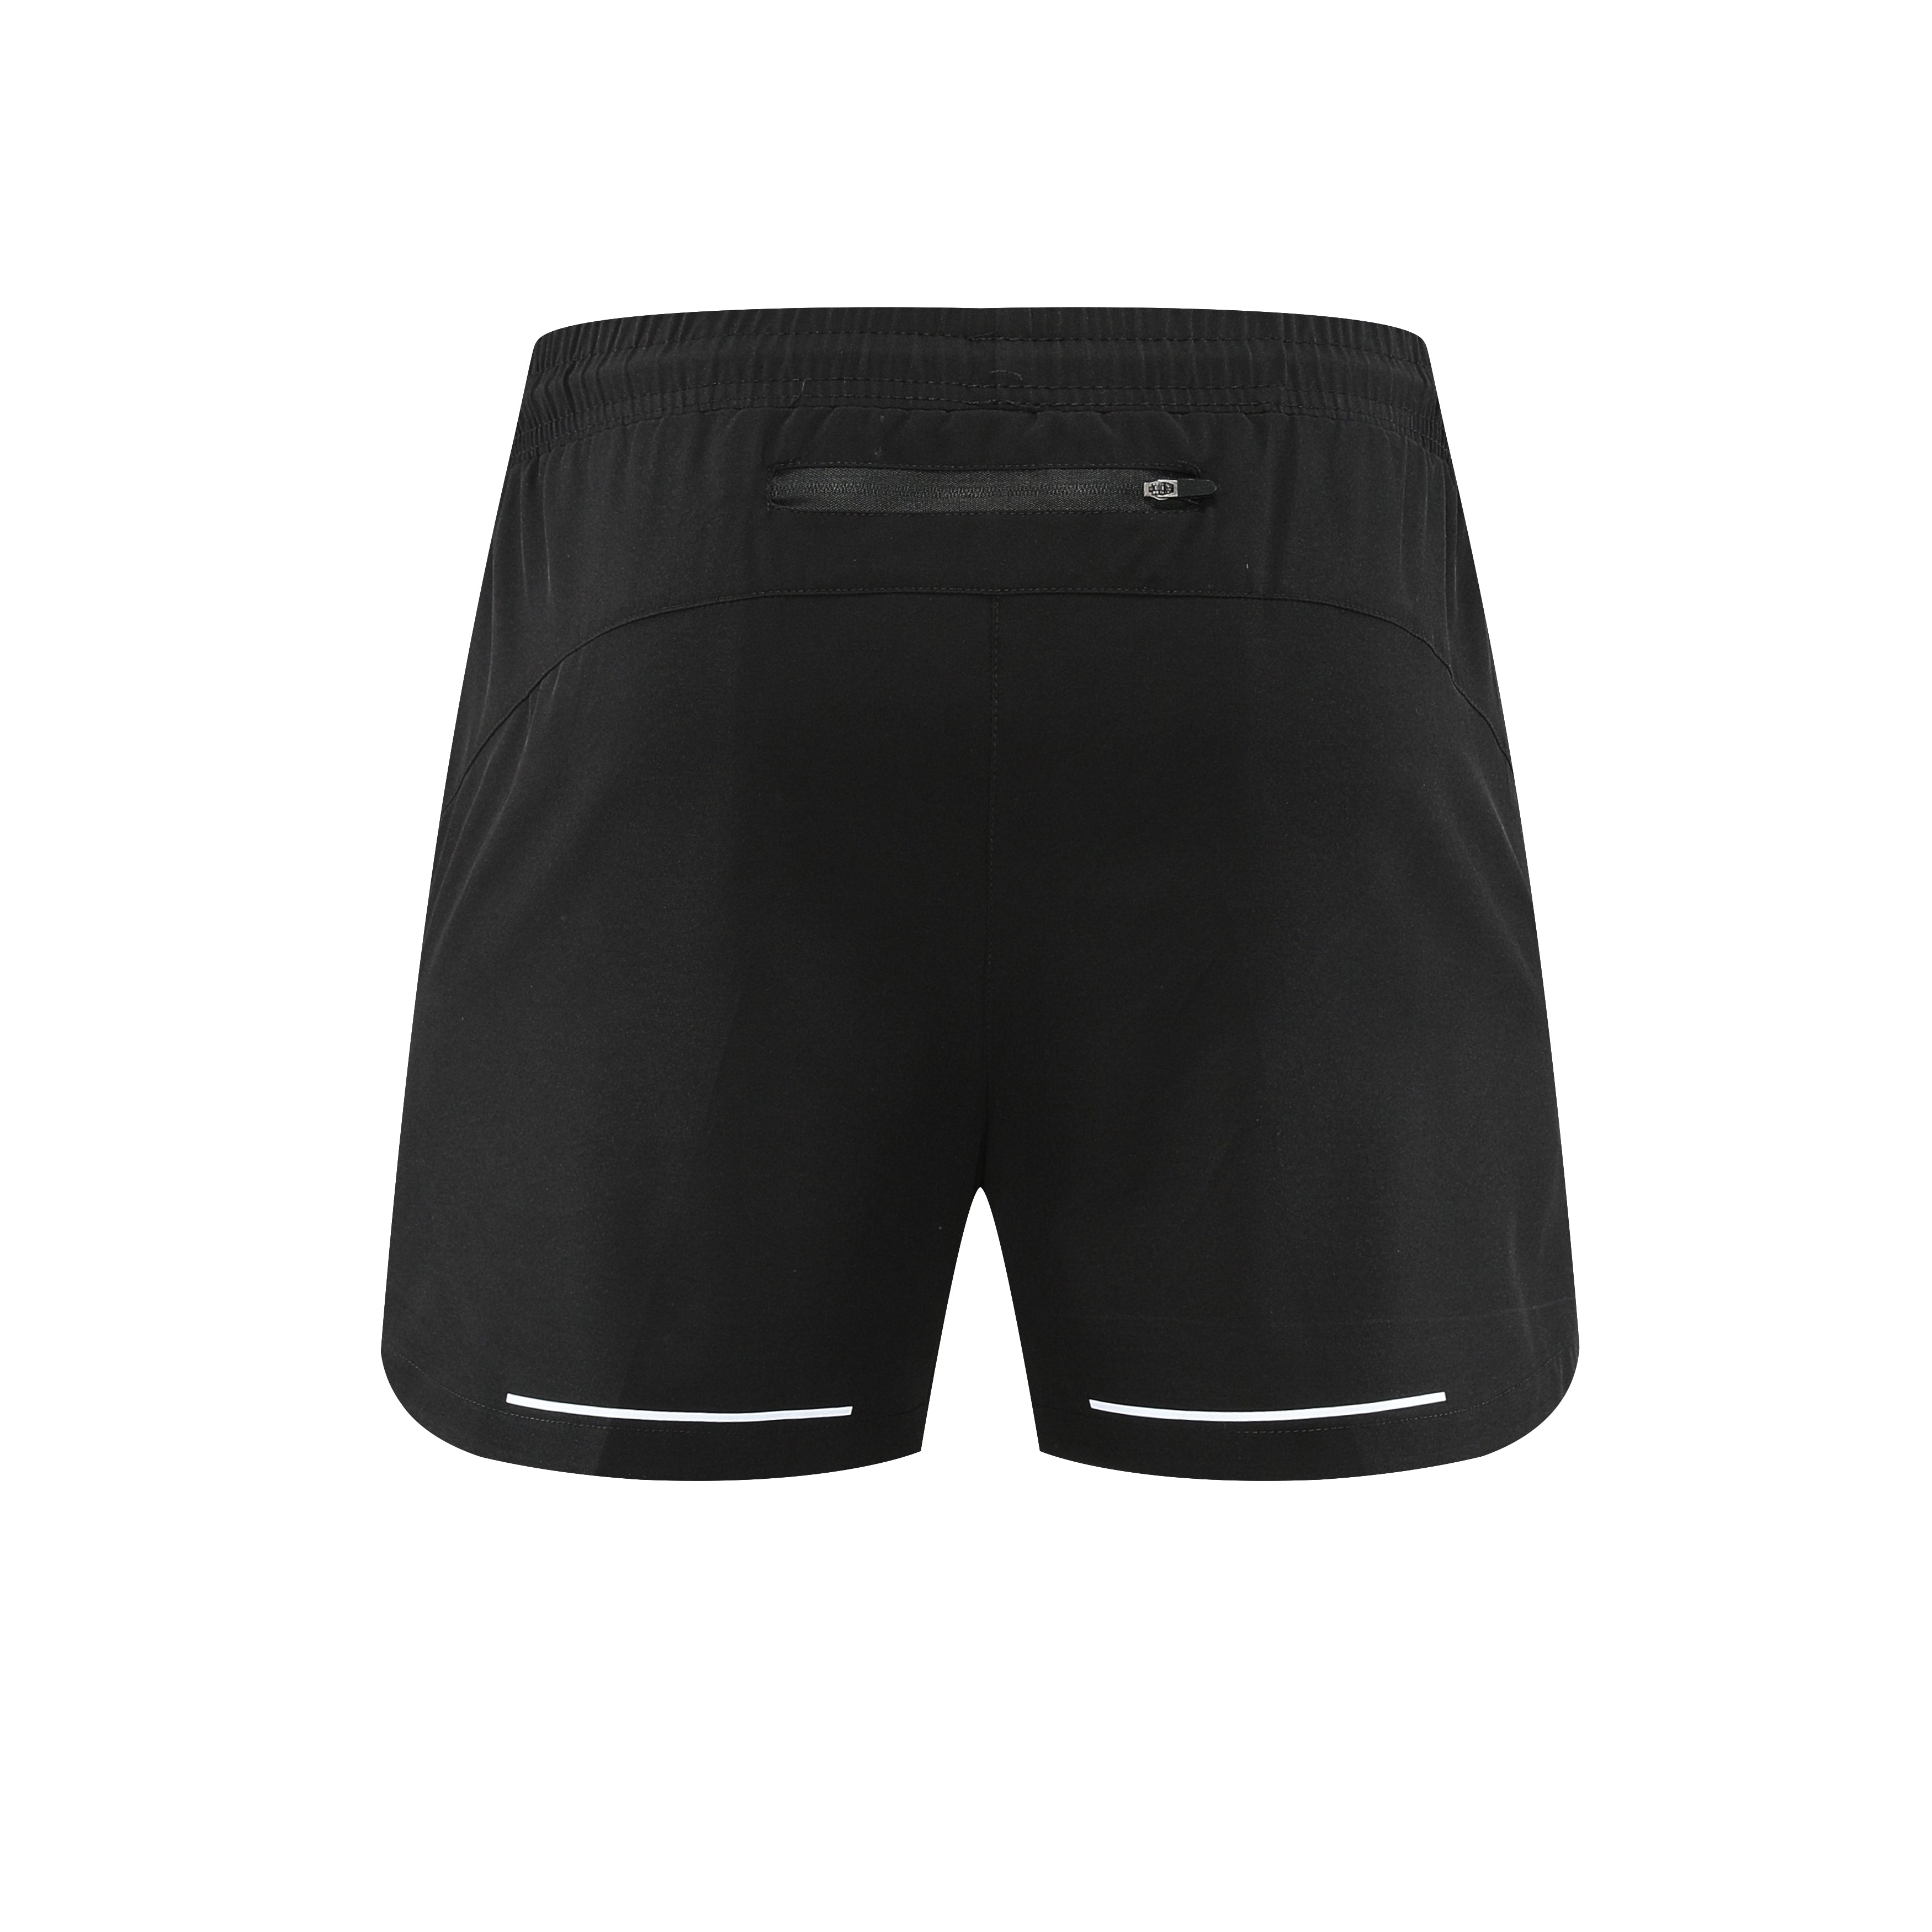 Men's Quick Dry Thorn Cross Graphic Shorts